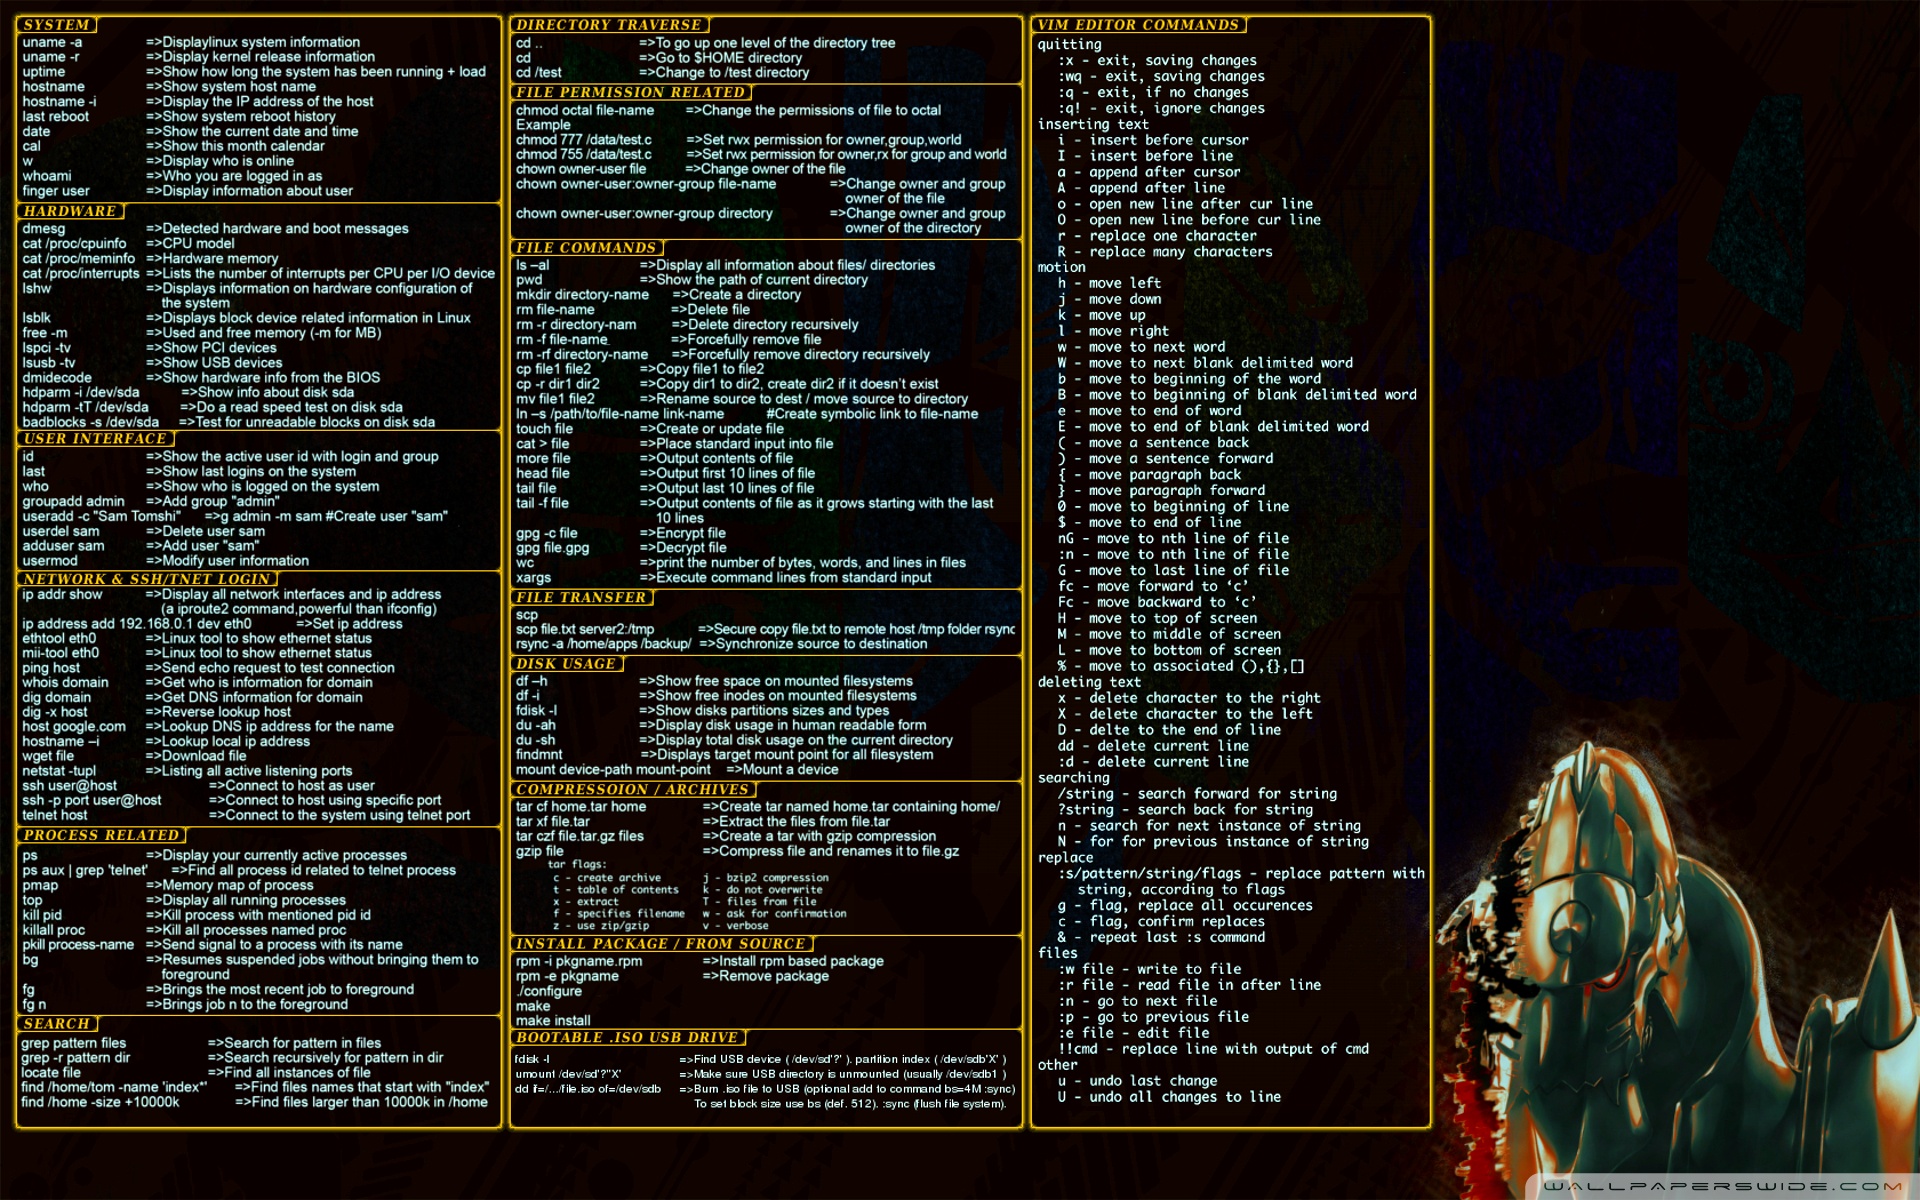 Linux Commands In Background - HD Wallpaper 